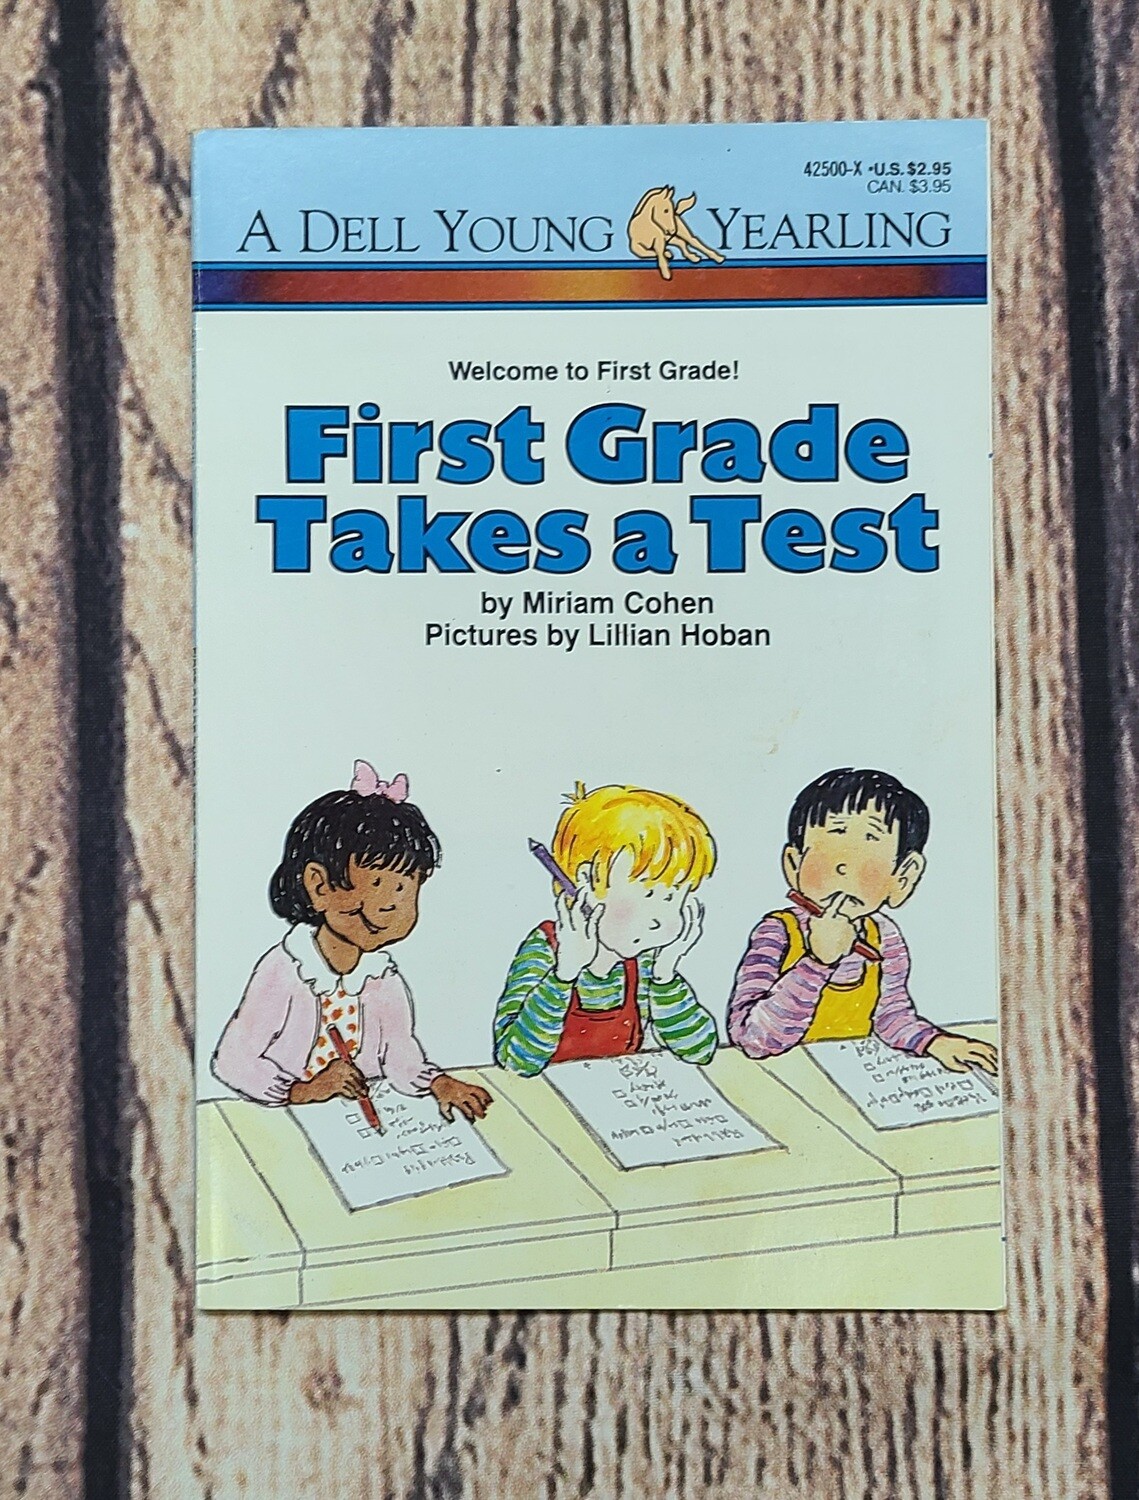 First Grade Takes a Test by Miriam Cohen